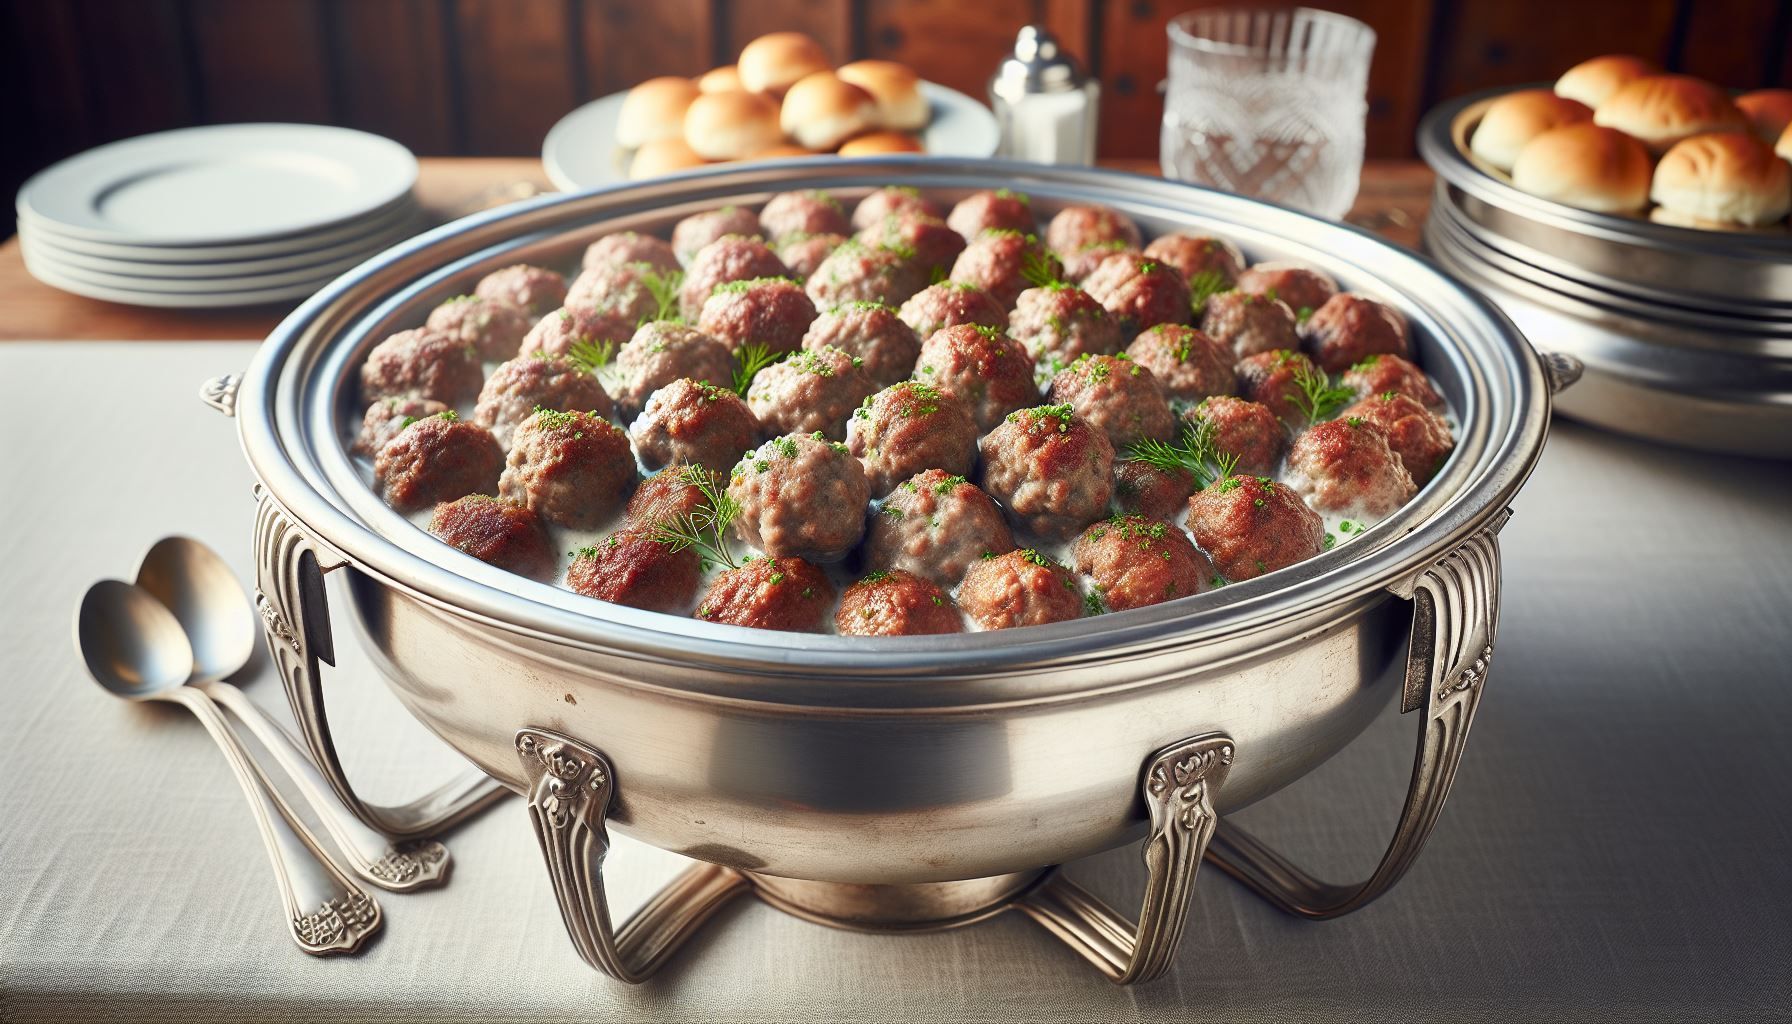 A silver bowl filled with meatballs is sitting on a table.